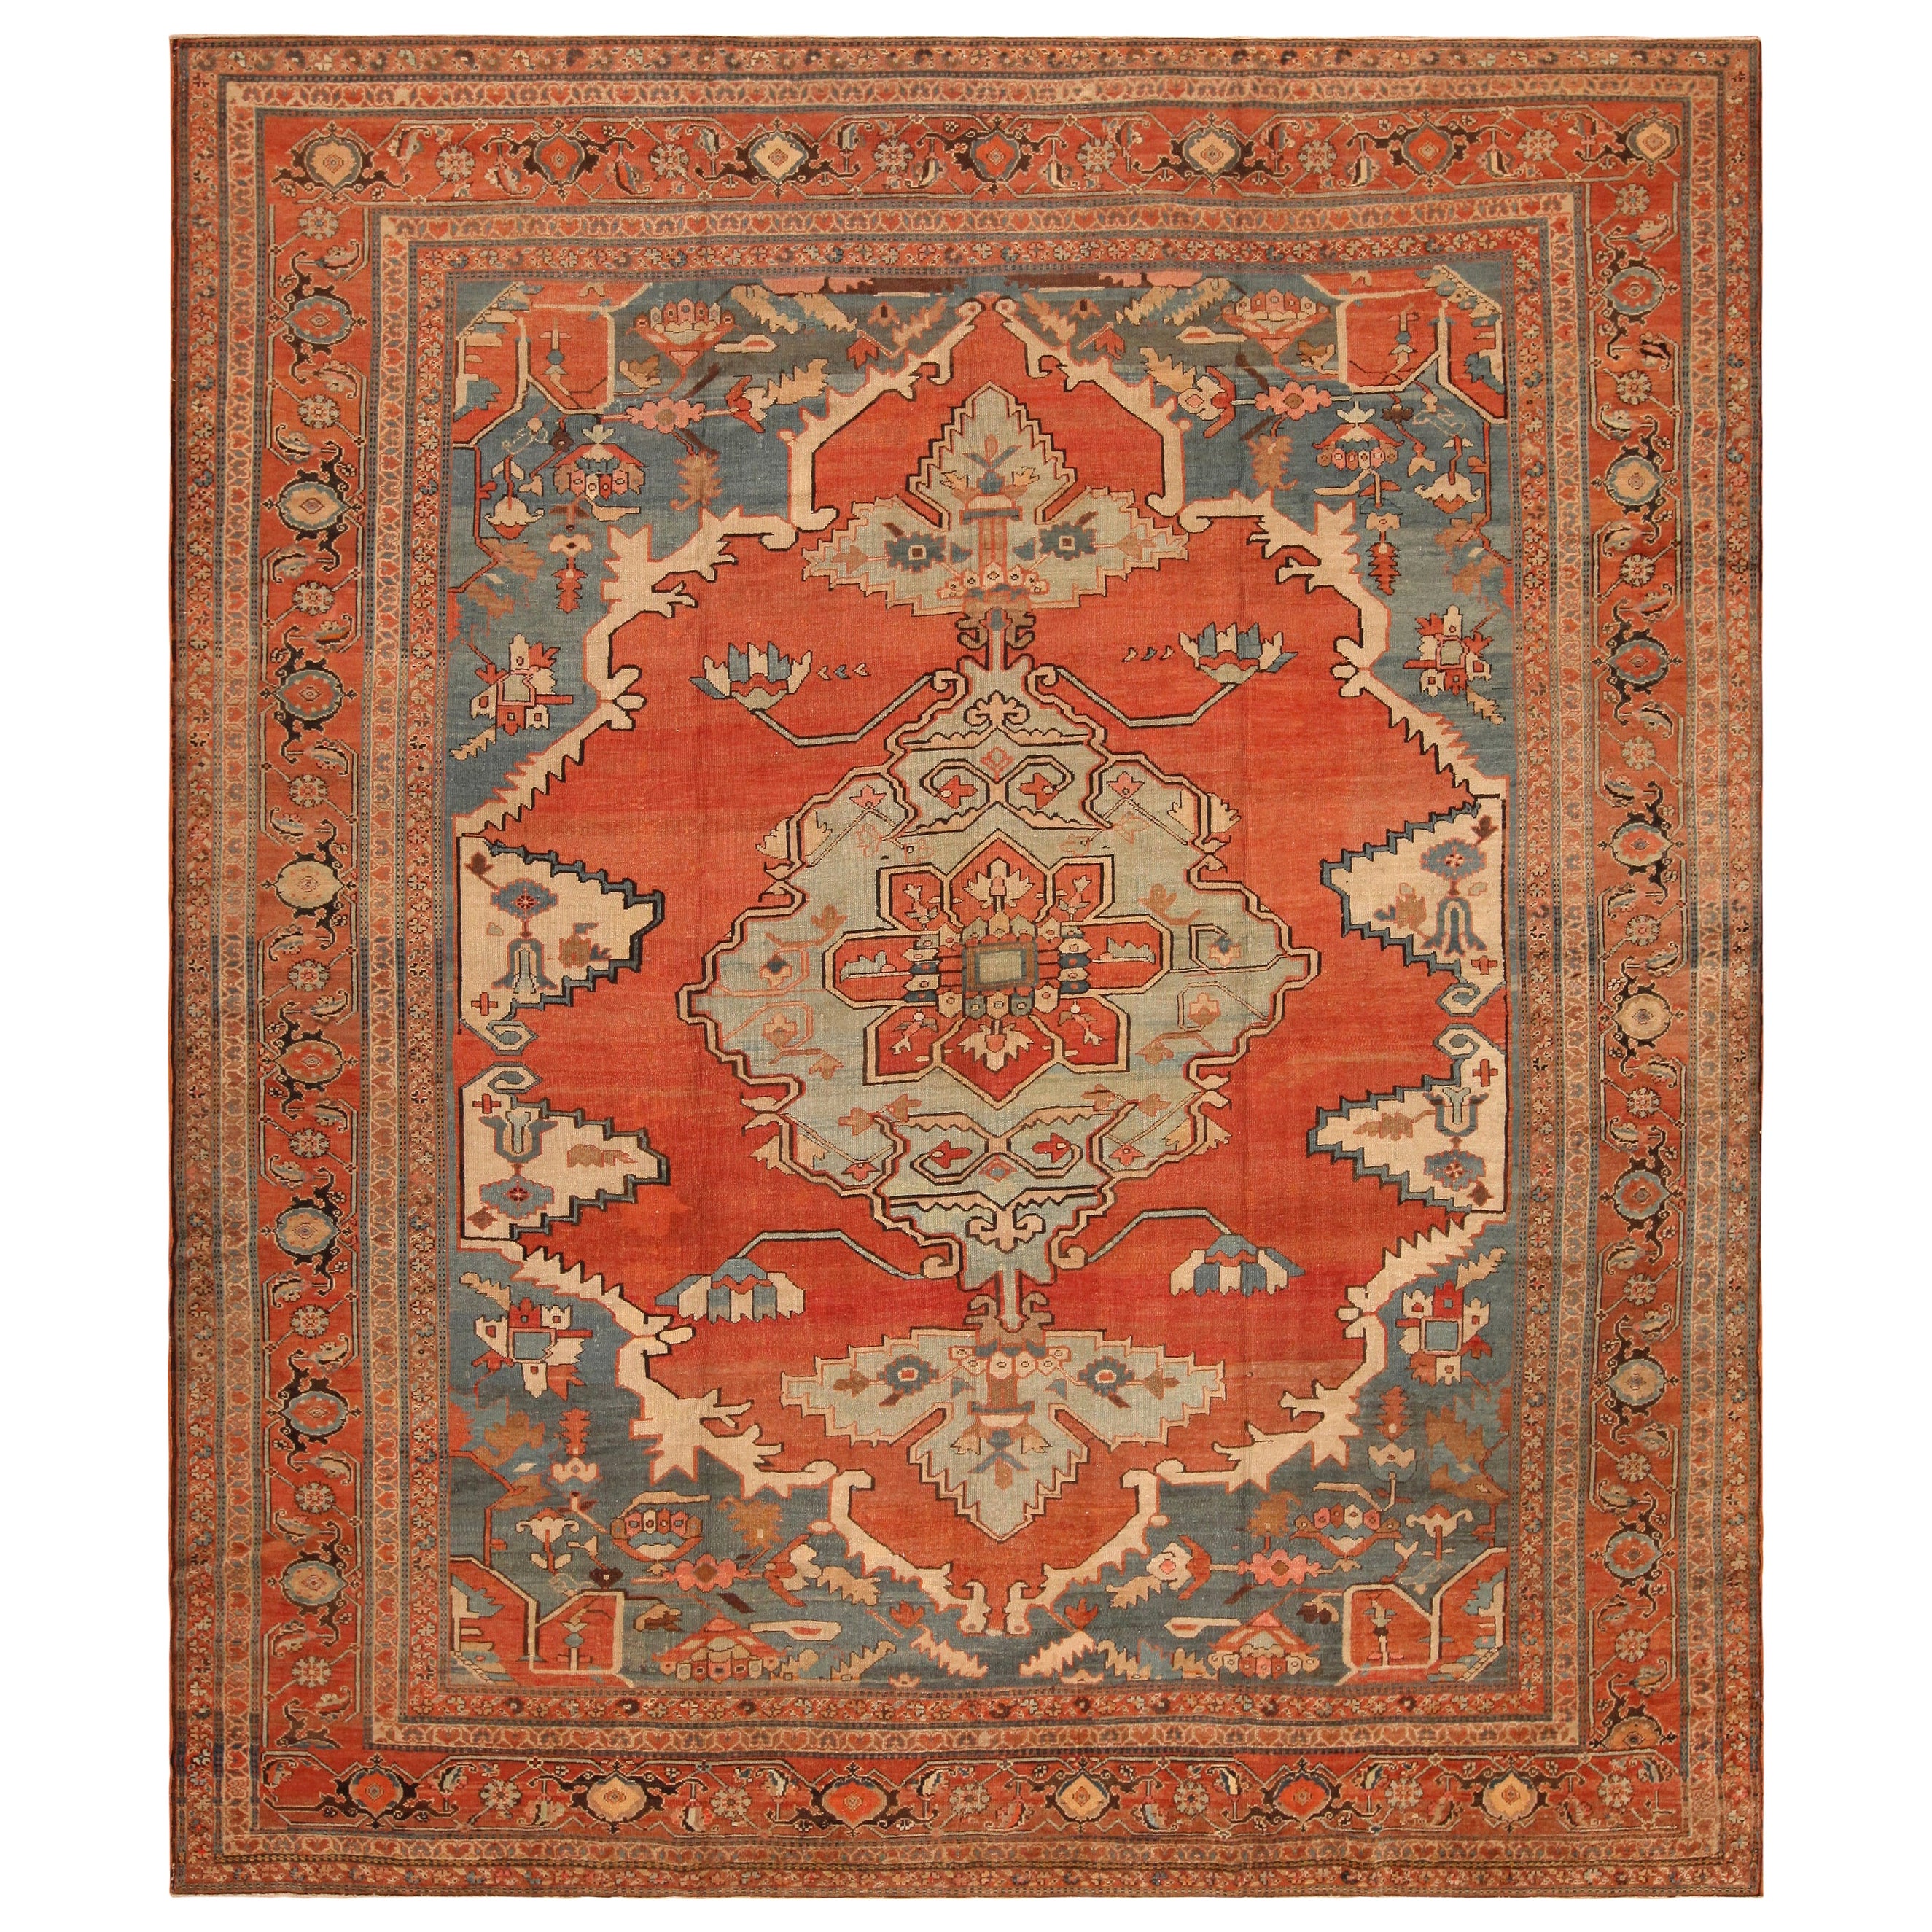 Antique Persian Serapi Rug. Size: 10 ft 7 in x 12 ft 2 in